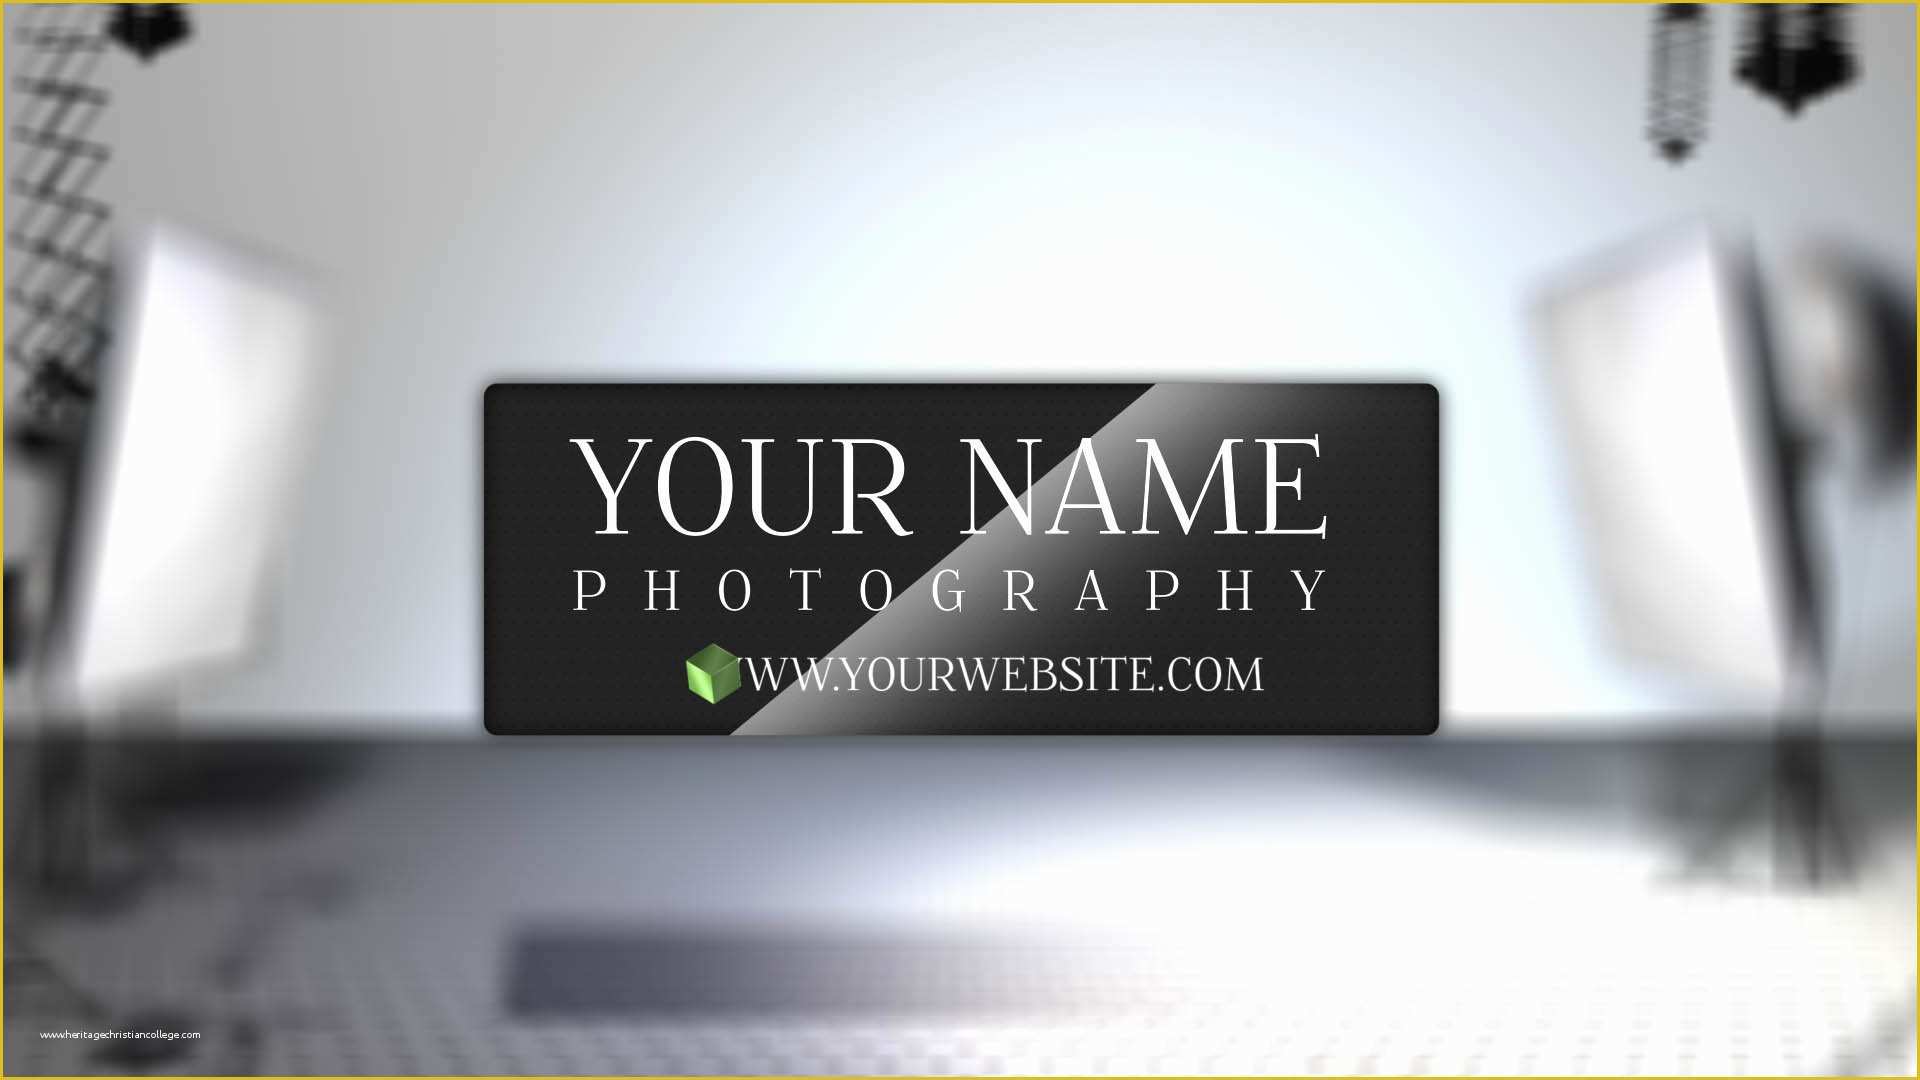 Bourne Identity Style Free after Effects Template Of Videohive Your Photo Studio Logo after Effects Project